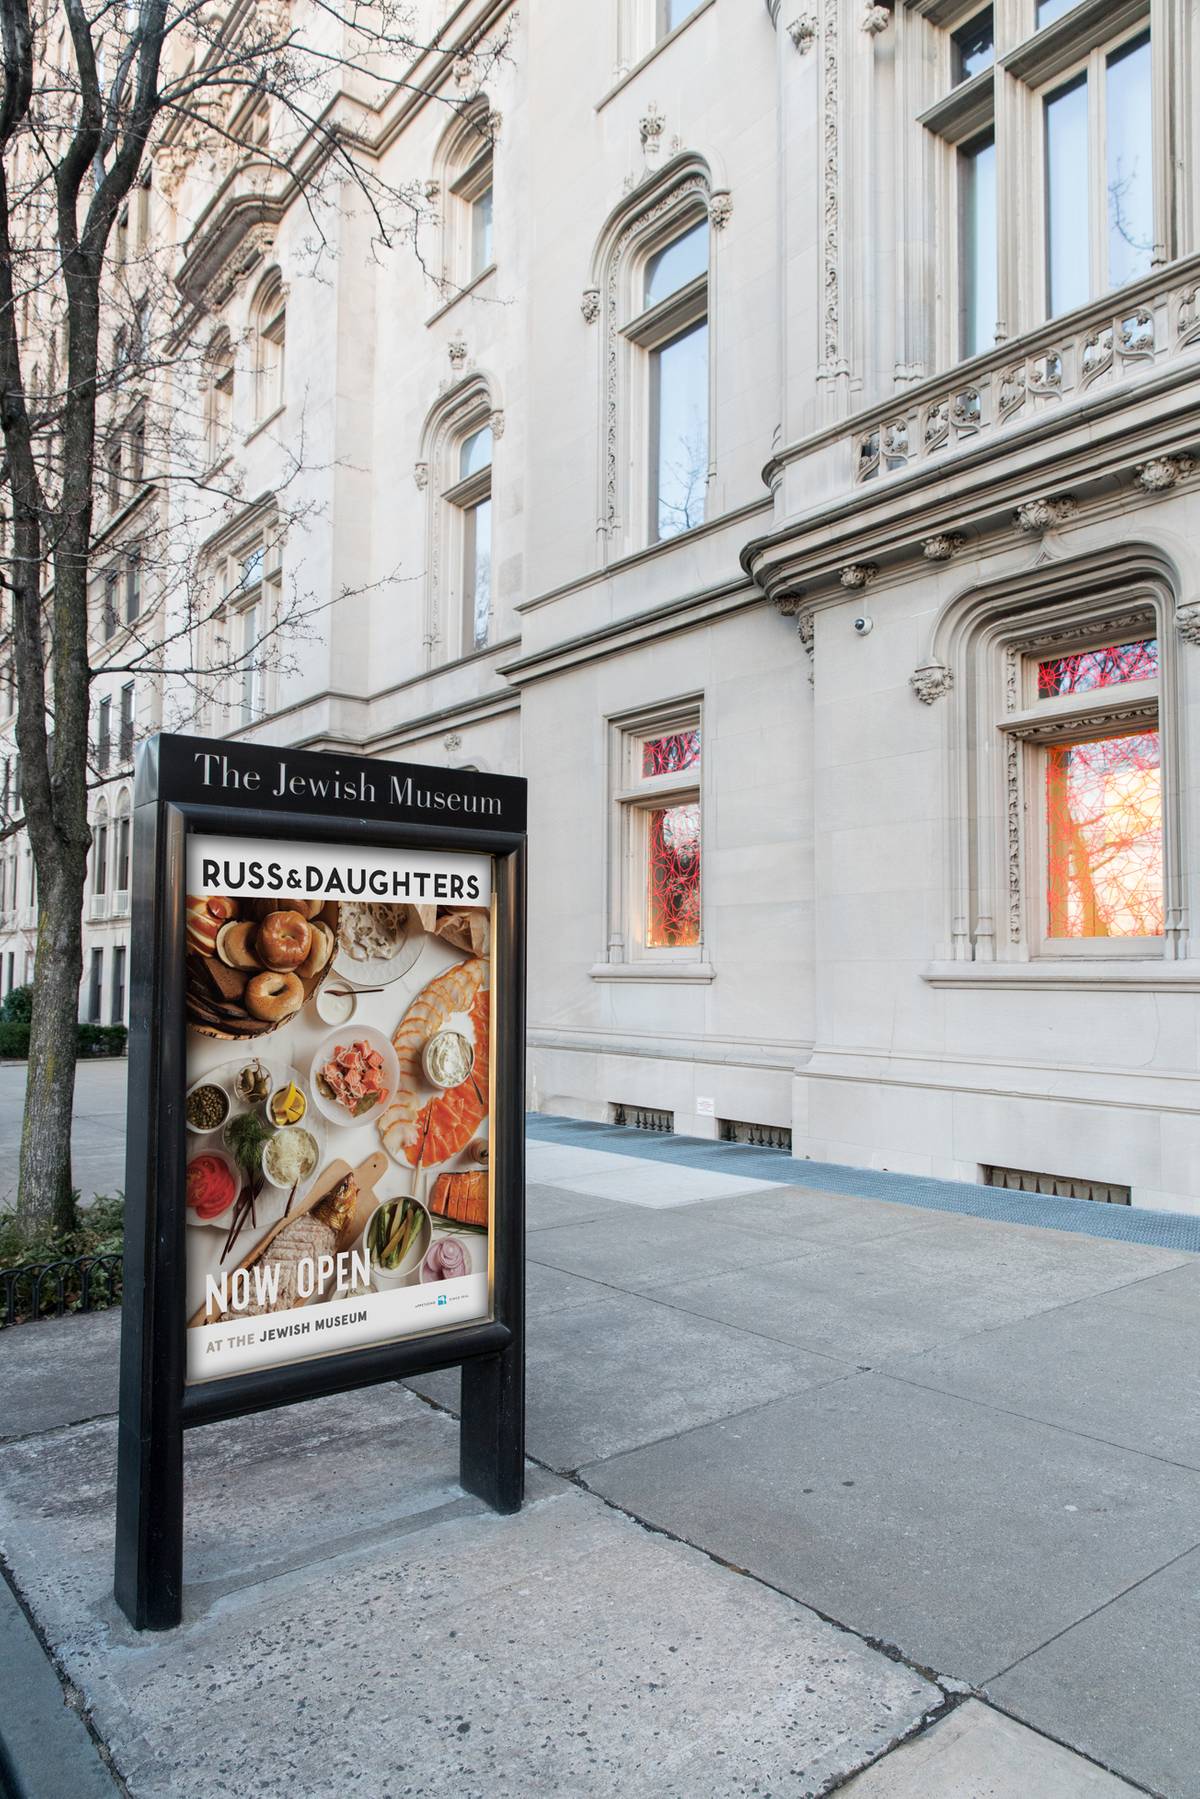 A sign for Russ & Daughters at The Jewish Museum in New York City. (Image: Russ & Daughters)